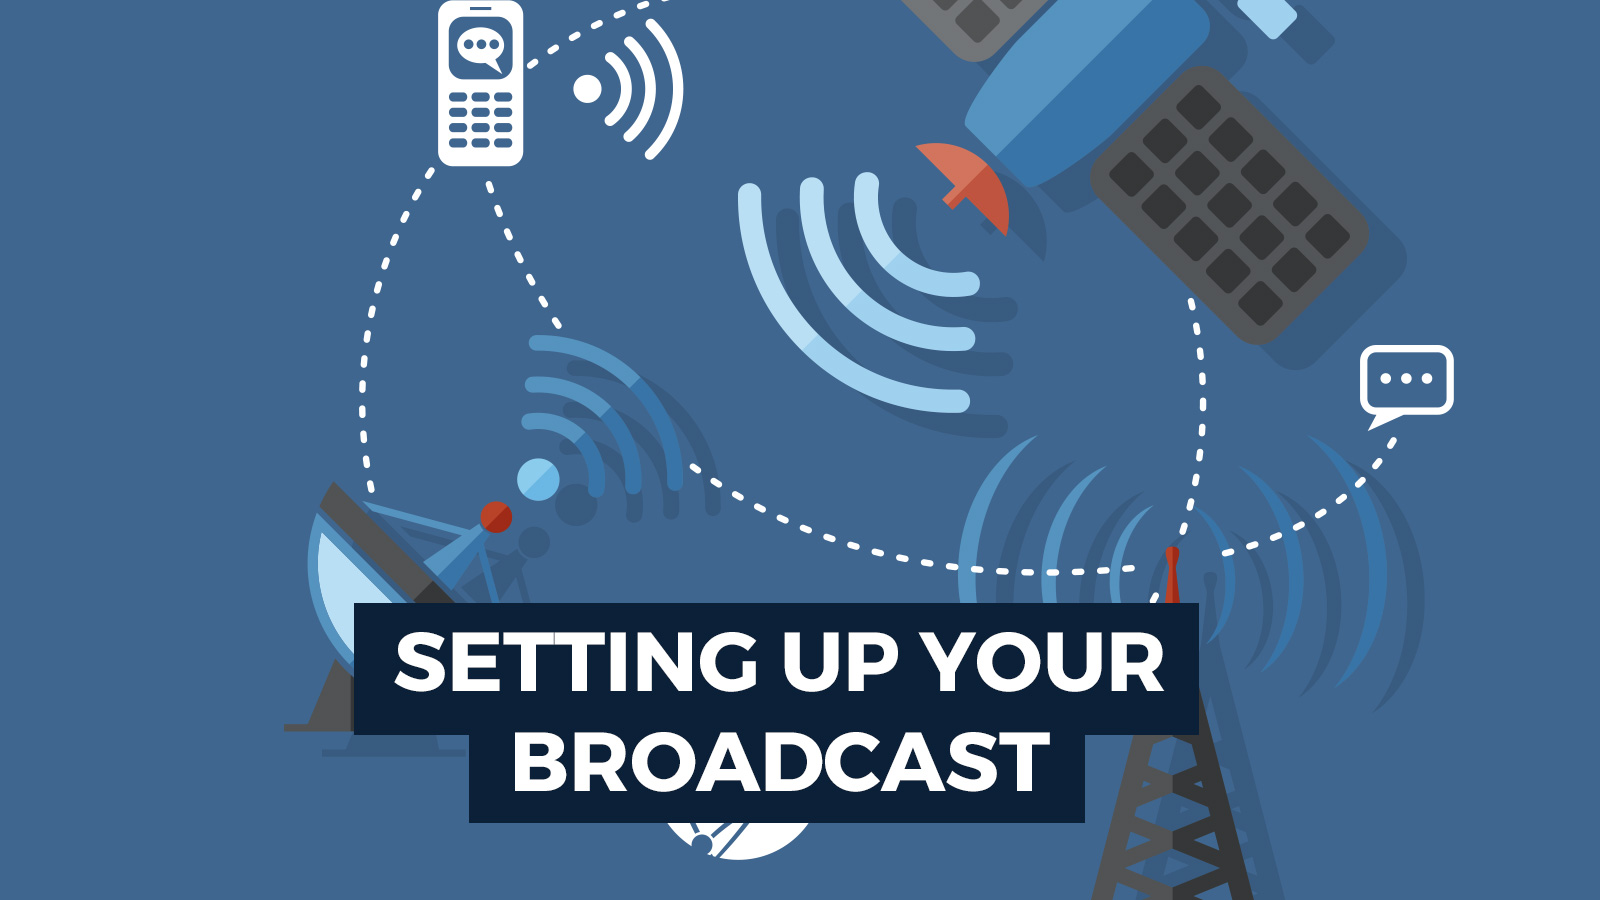 How do I start my own radio station? First Step in this guide. Setting Up Broadcast. From Radio WordPress Theme